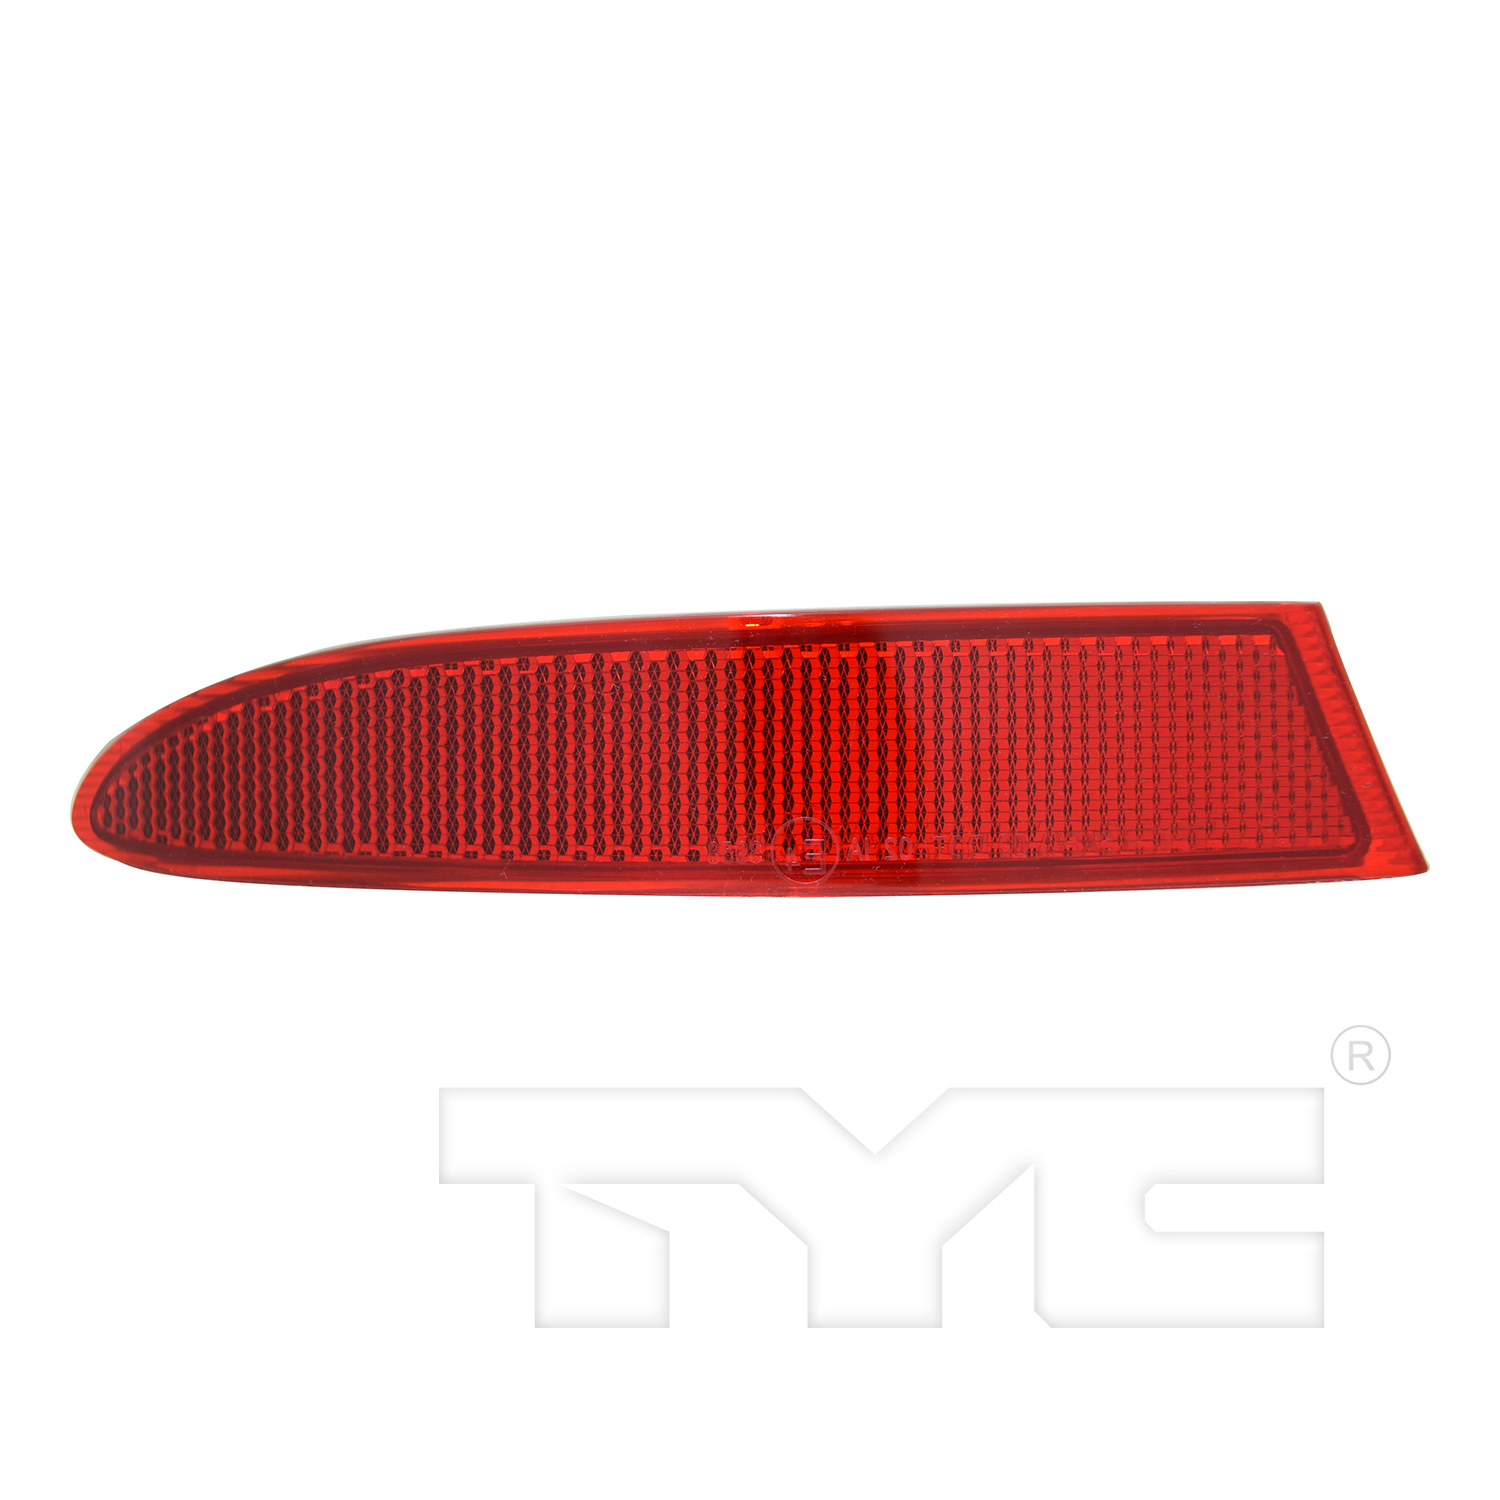 Aftermarket LAMPS for BMW - X3, X3,14-17,LT Rear bumper reflector